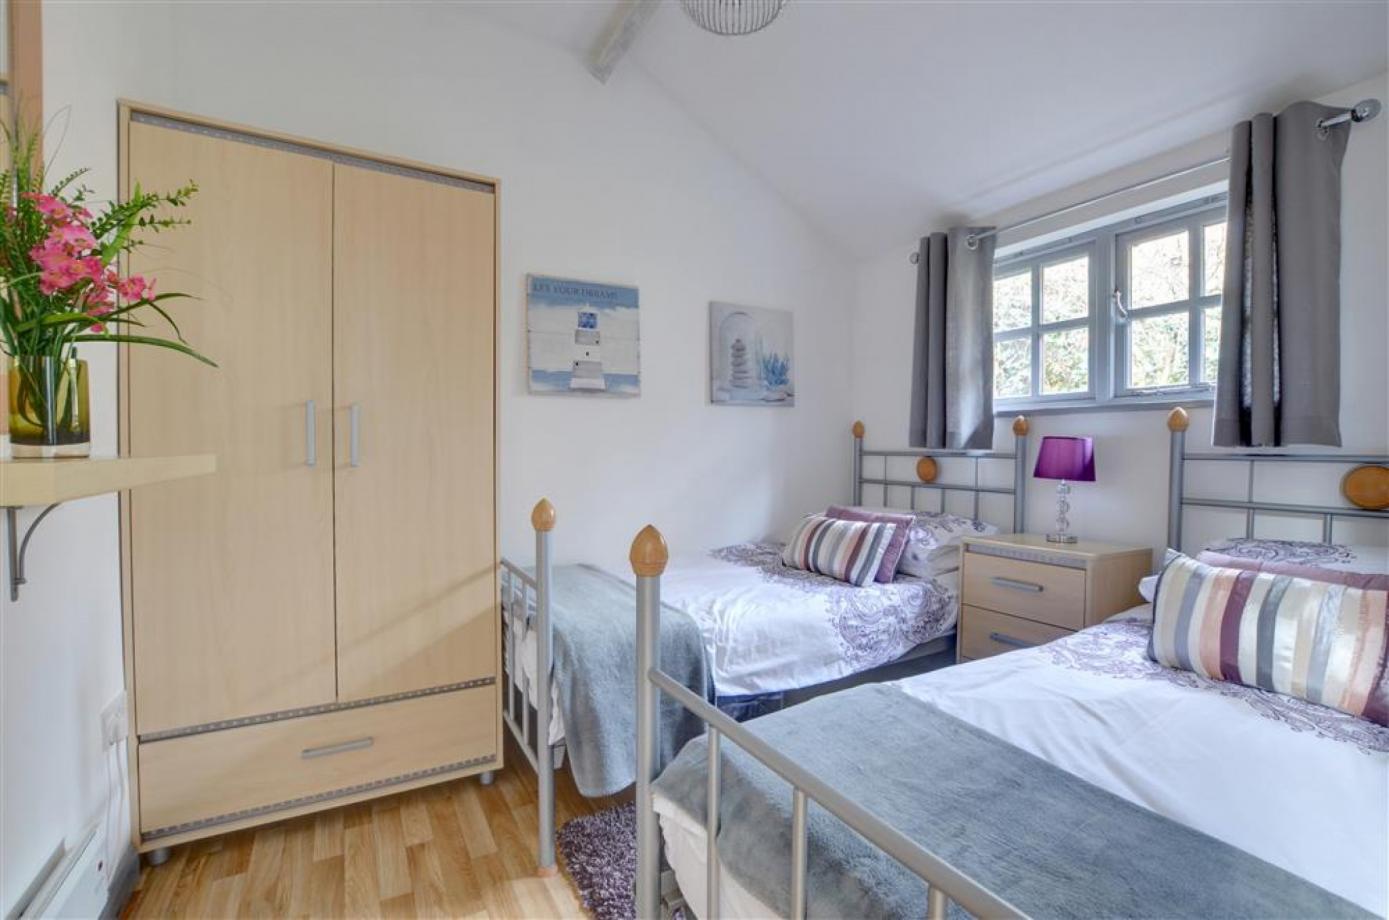 A bedroom with two single beds and a wardrobe in one of the Cranbrook Holiday lets for accomodation in Kent.